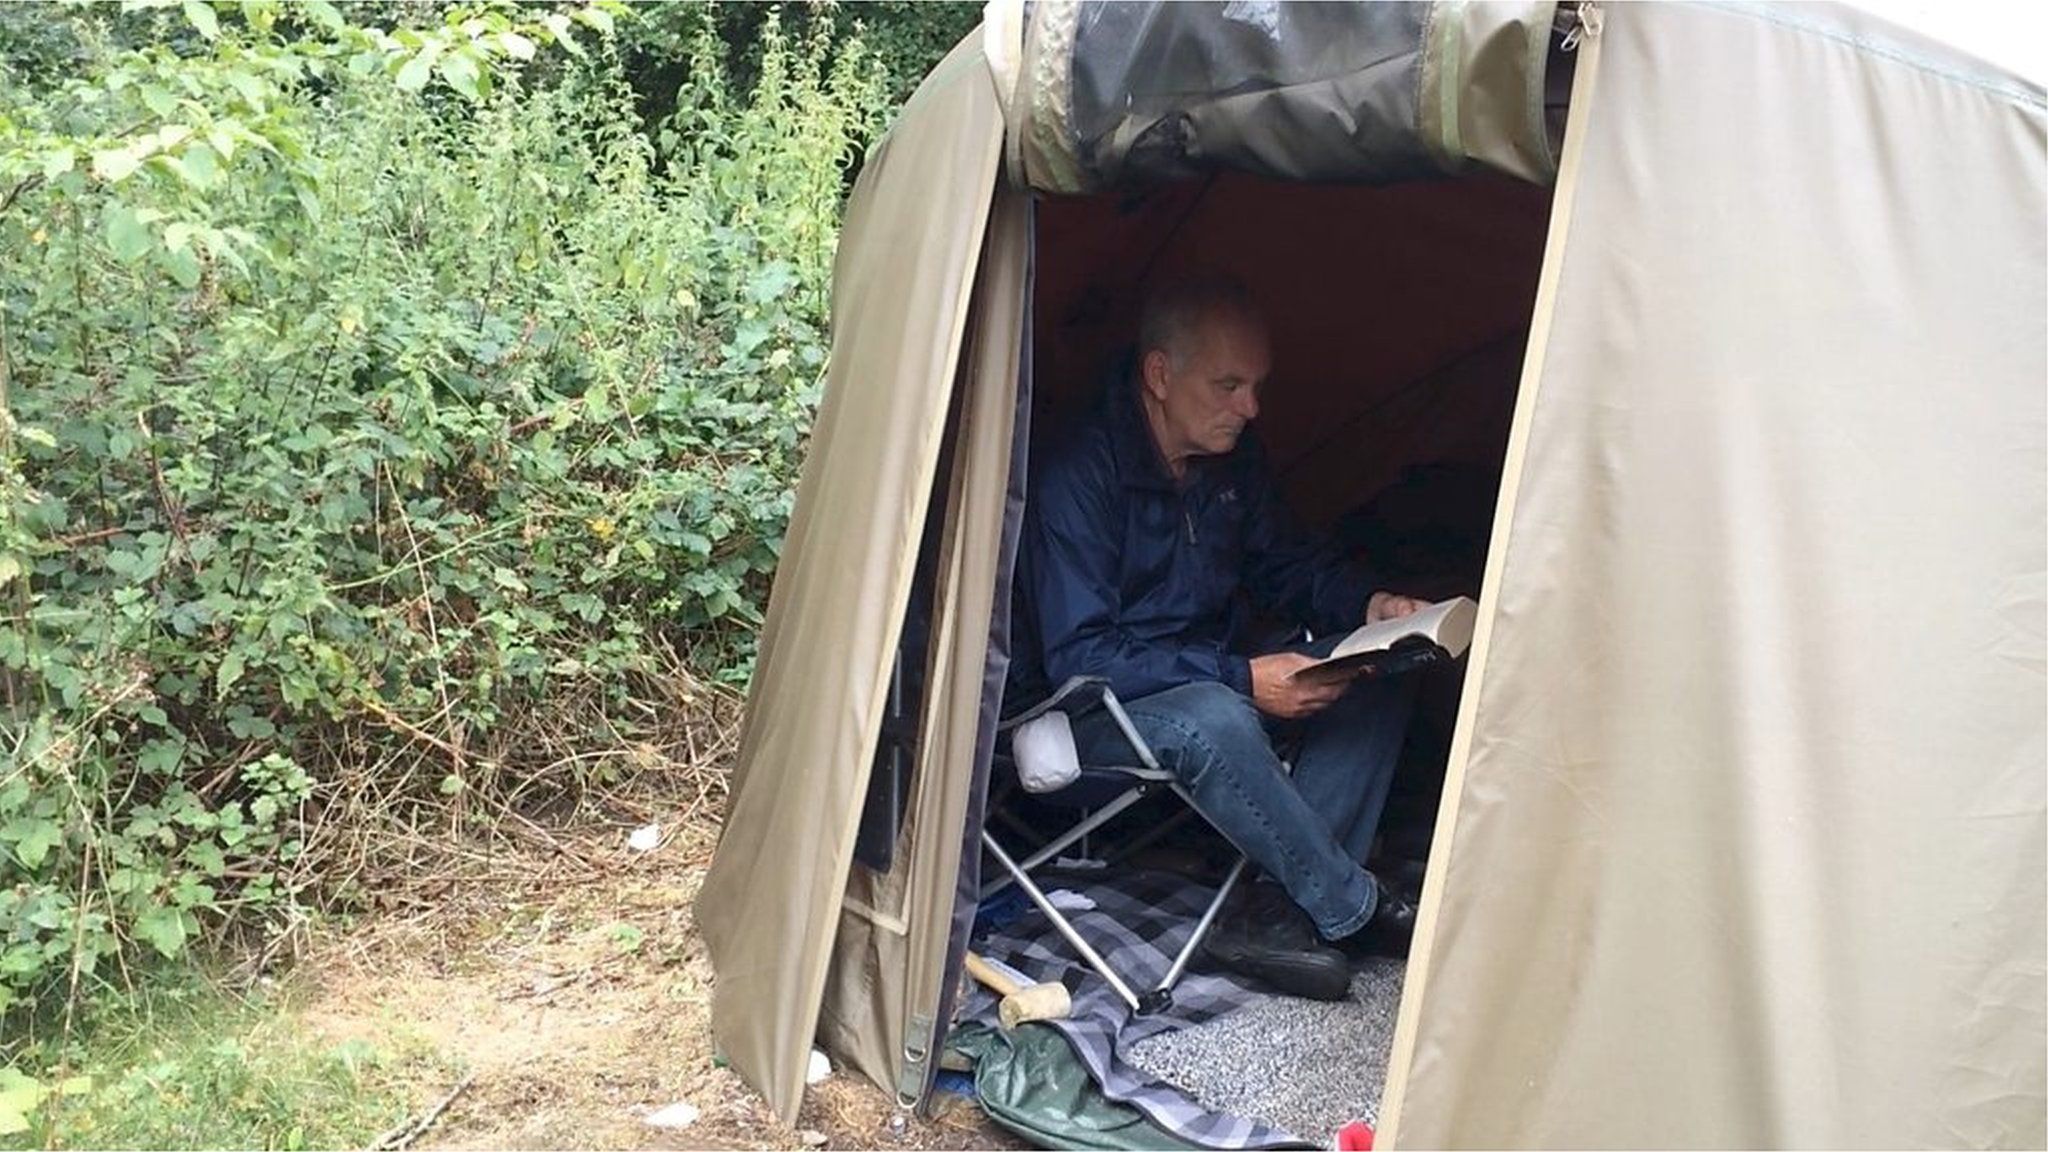 Mervyn Painton, 65, spent three months living in one of six tents on a small area of countryside.